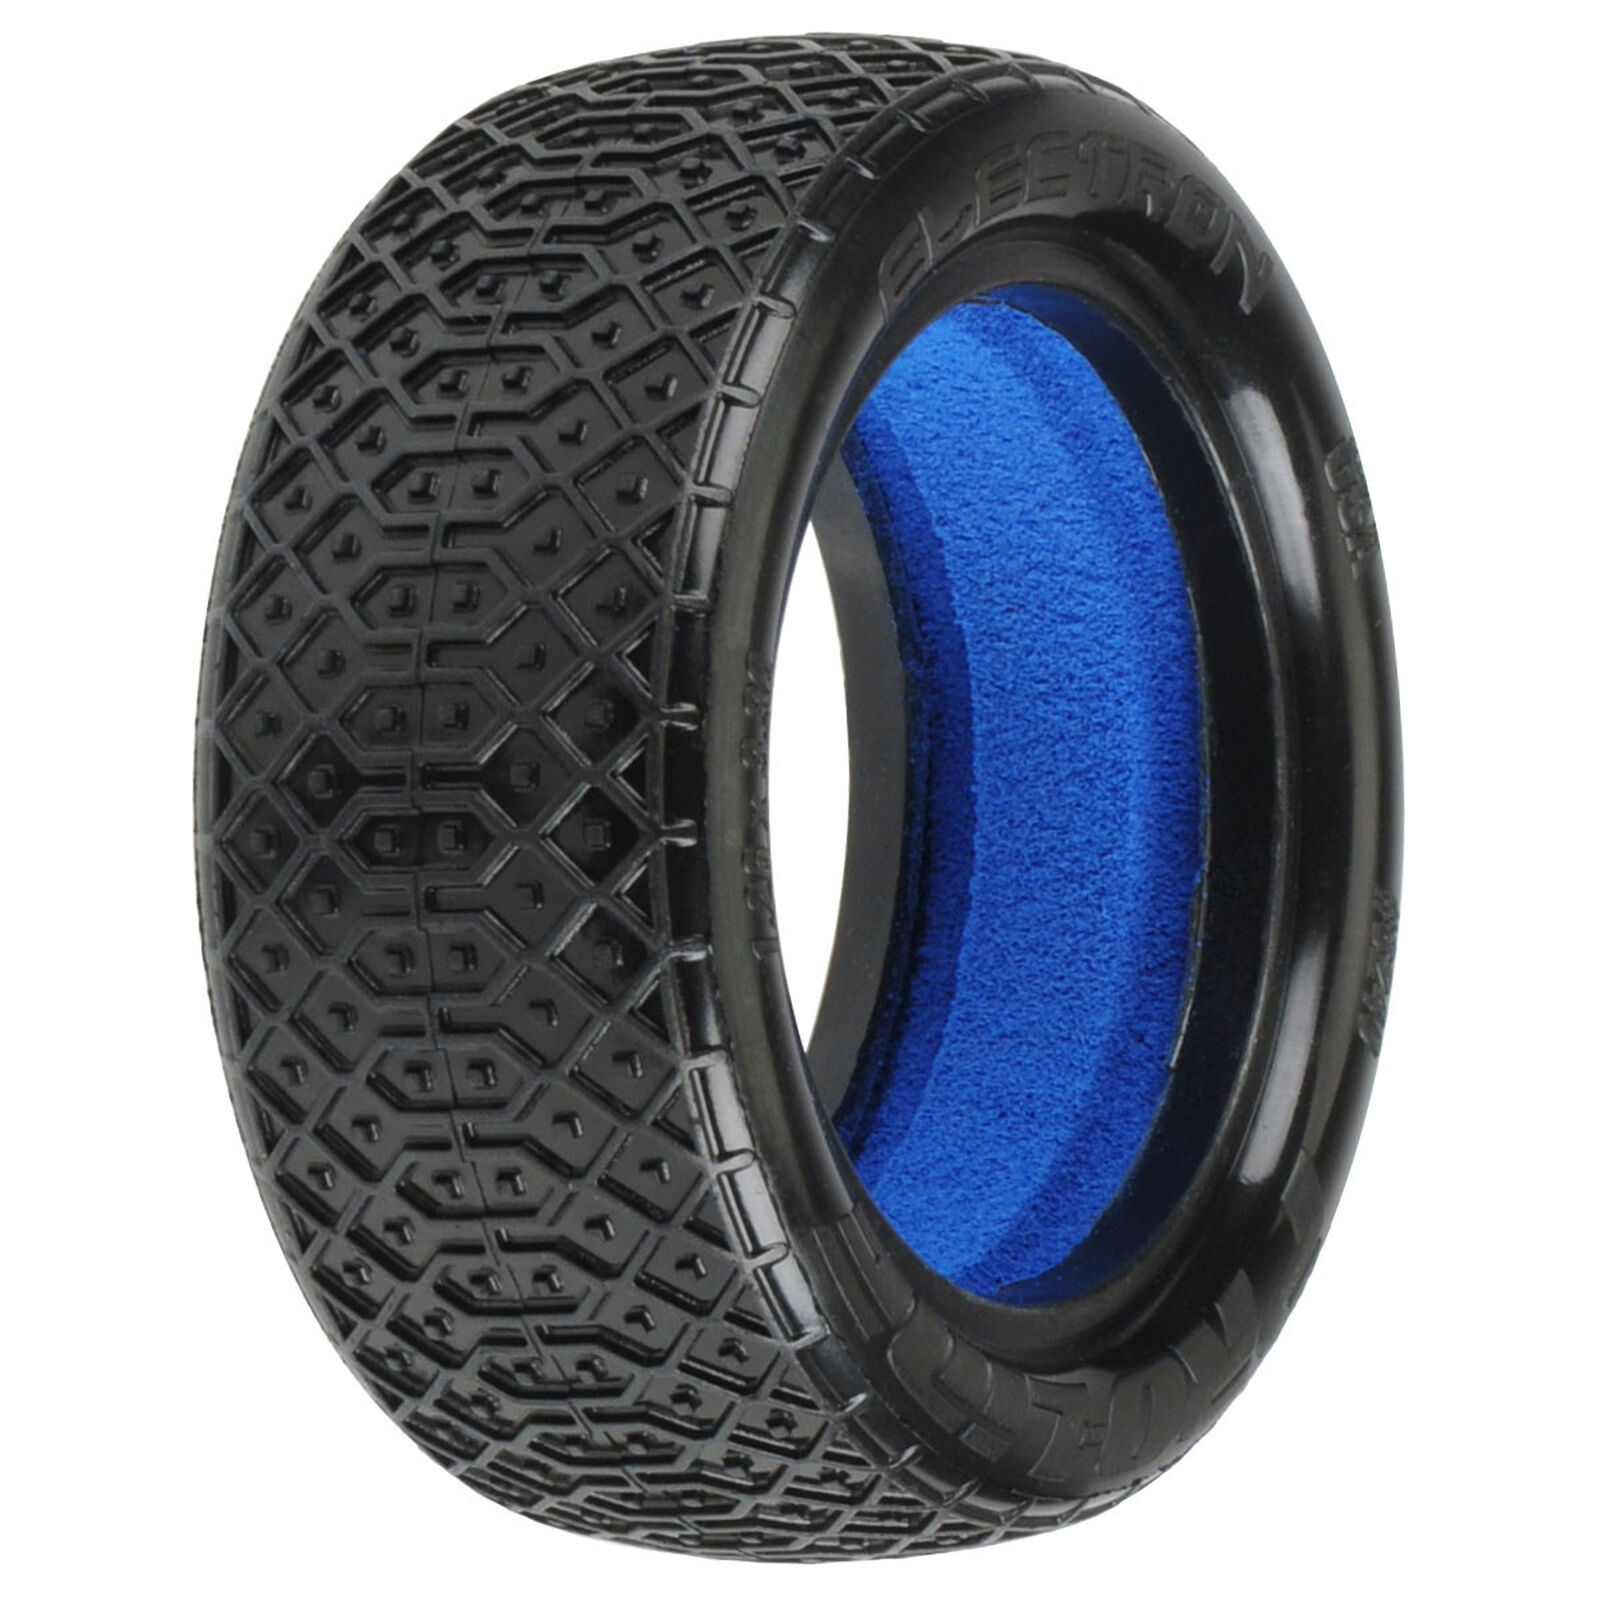 1/10 Electron 2.2 4WD Off-Road Buggy Front Tires with Closed Cell Foam Inserts, M4 - Super Soft (2)